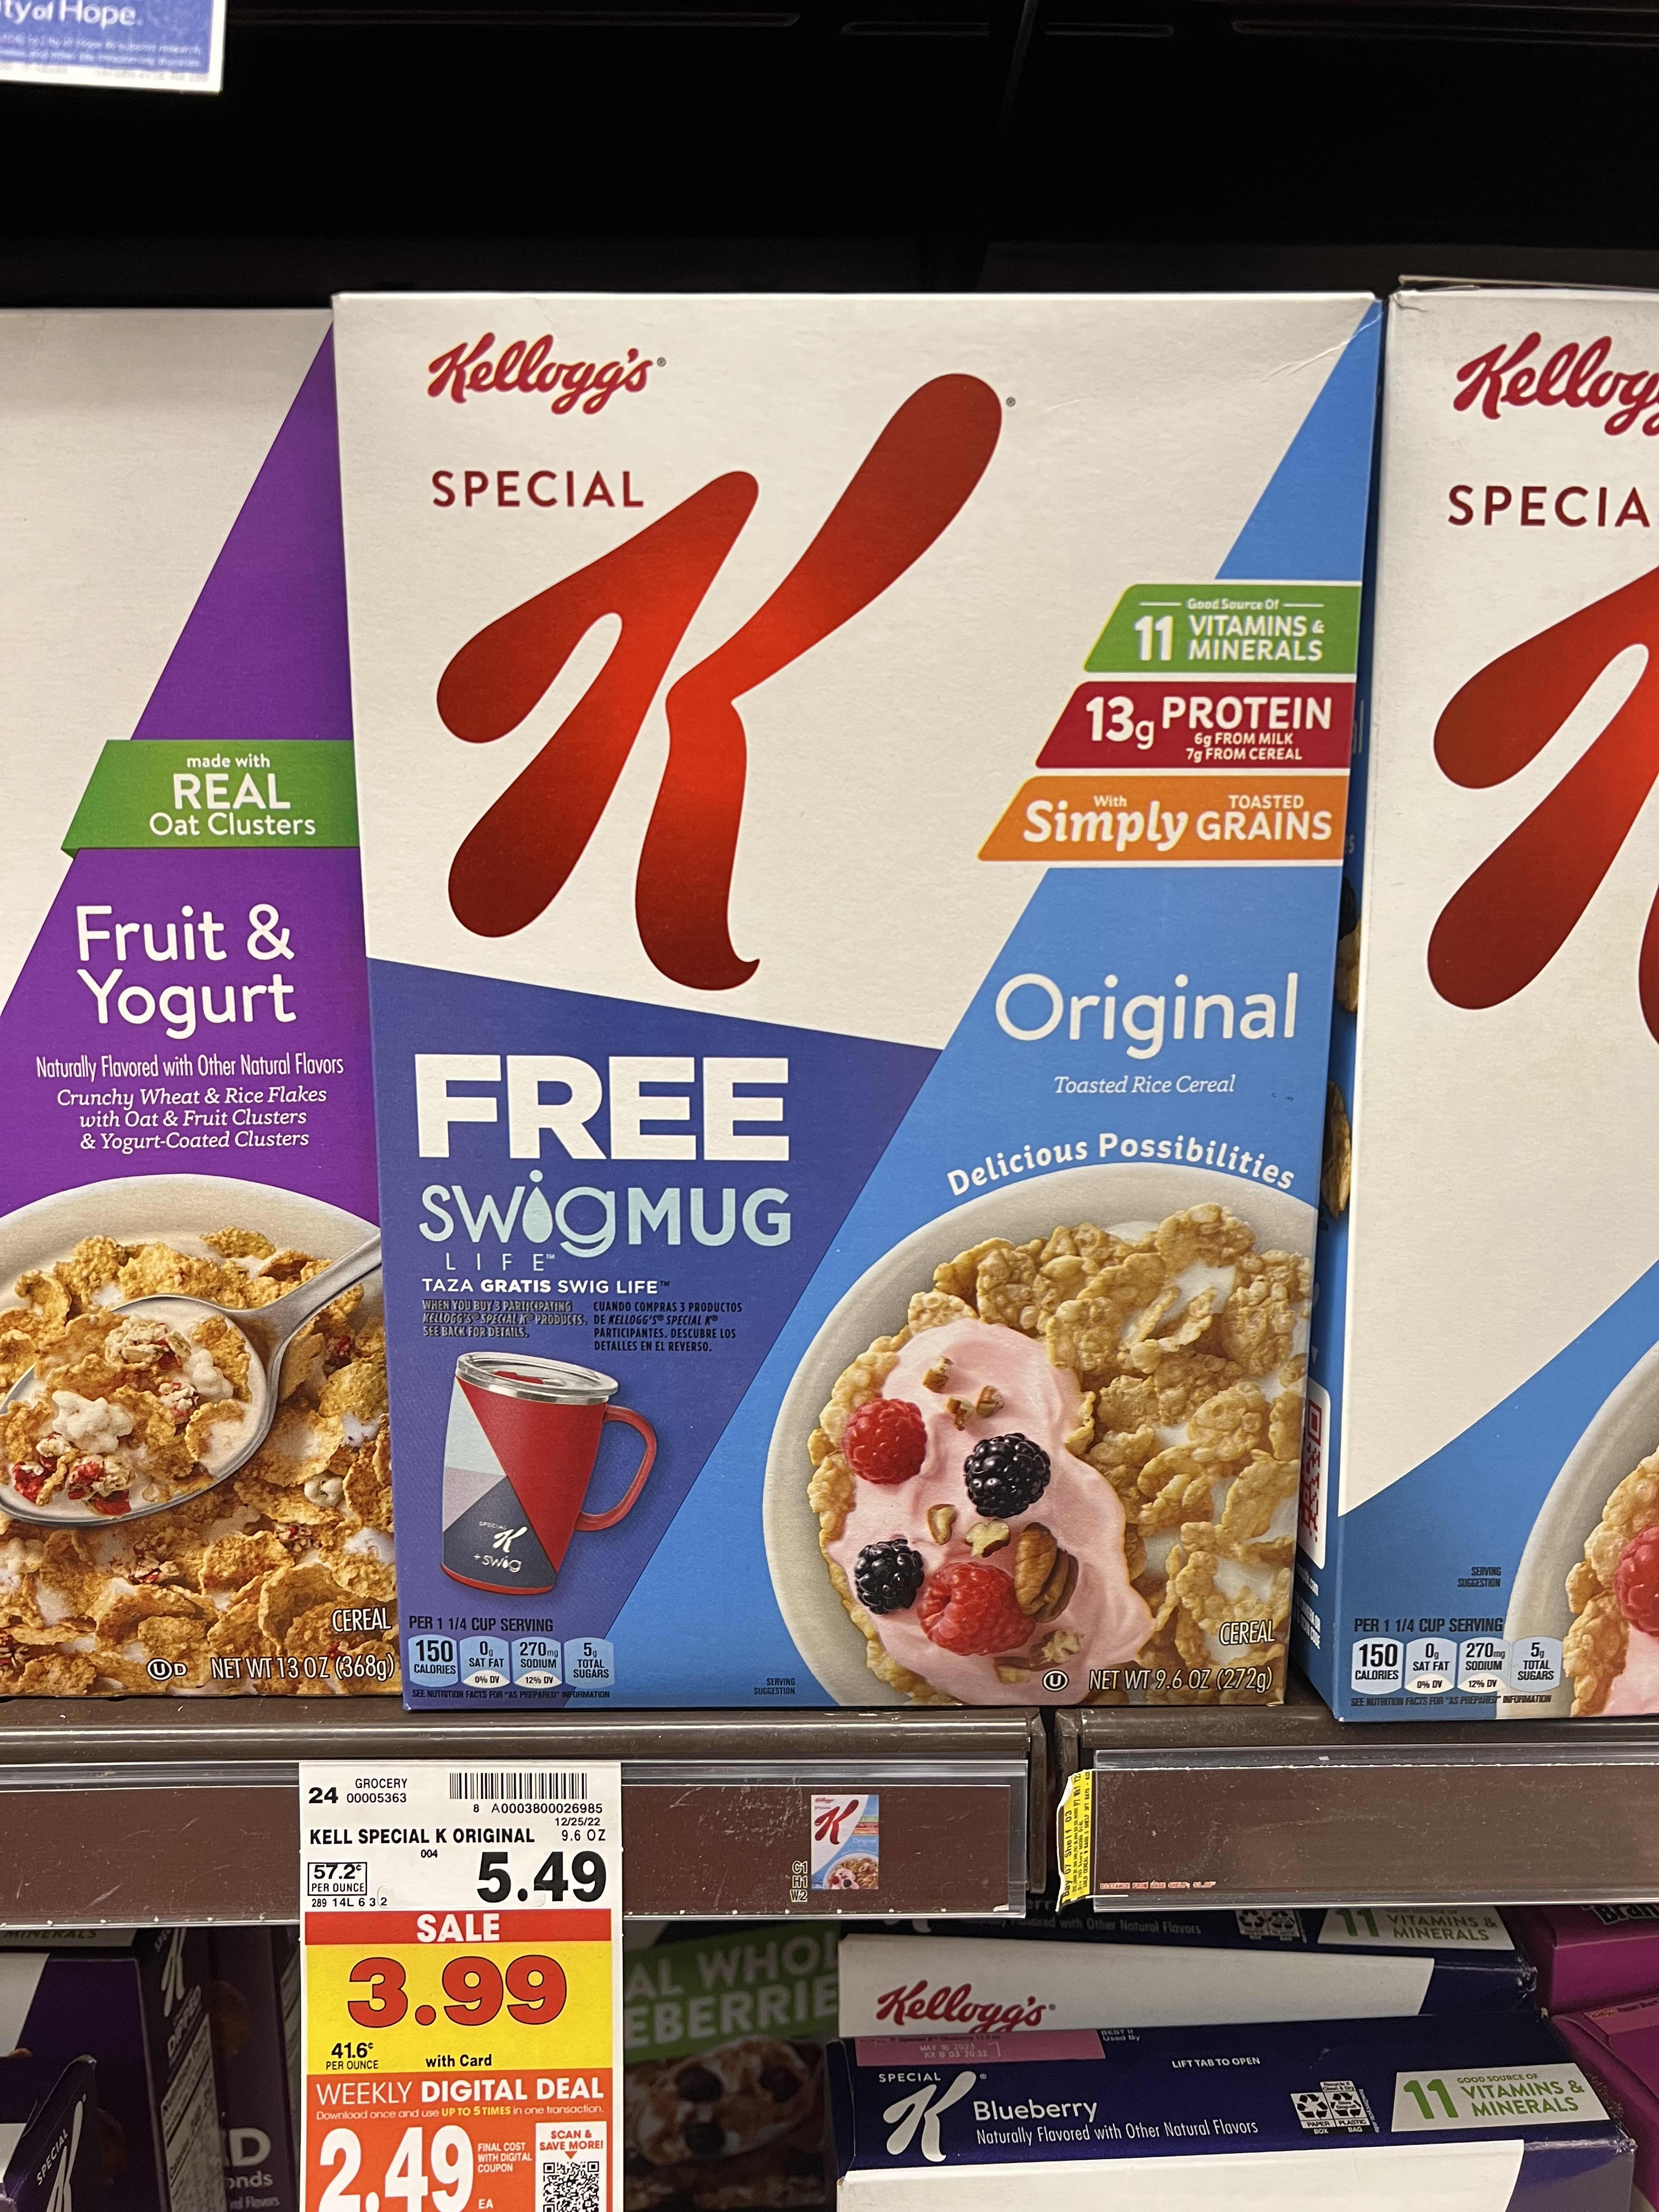 REVIEW: Kellogg's Limited Edition Special K Chocolatey Strawberry Cereal -  The Impulsive Buy